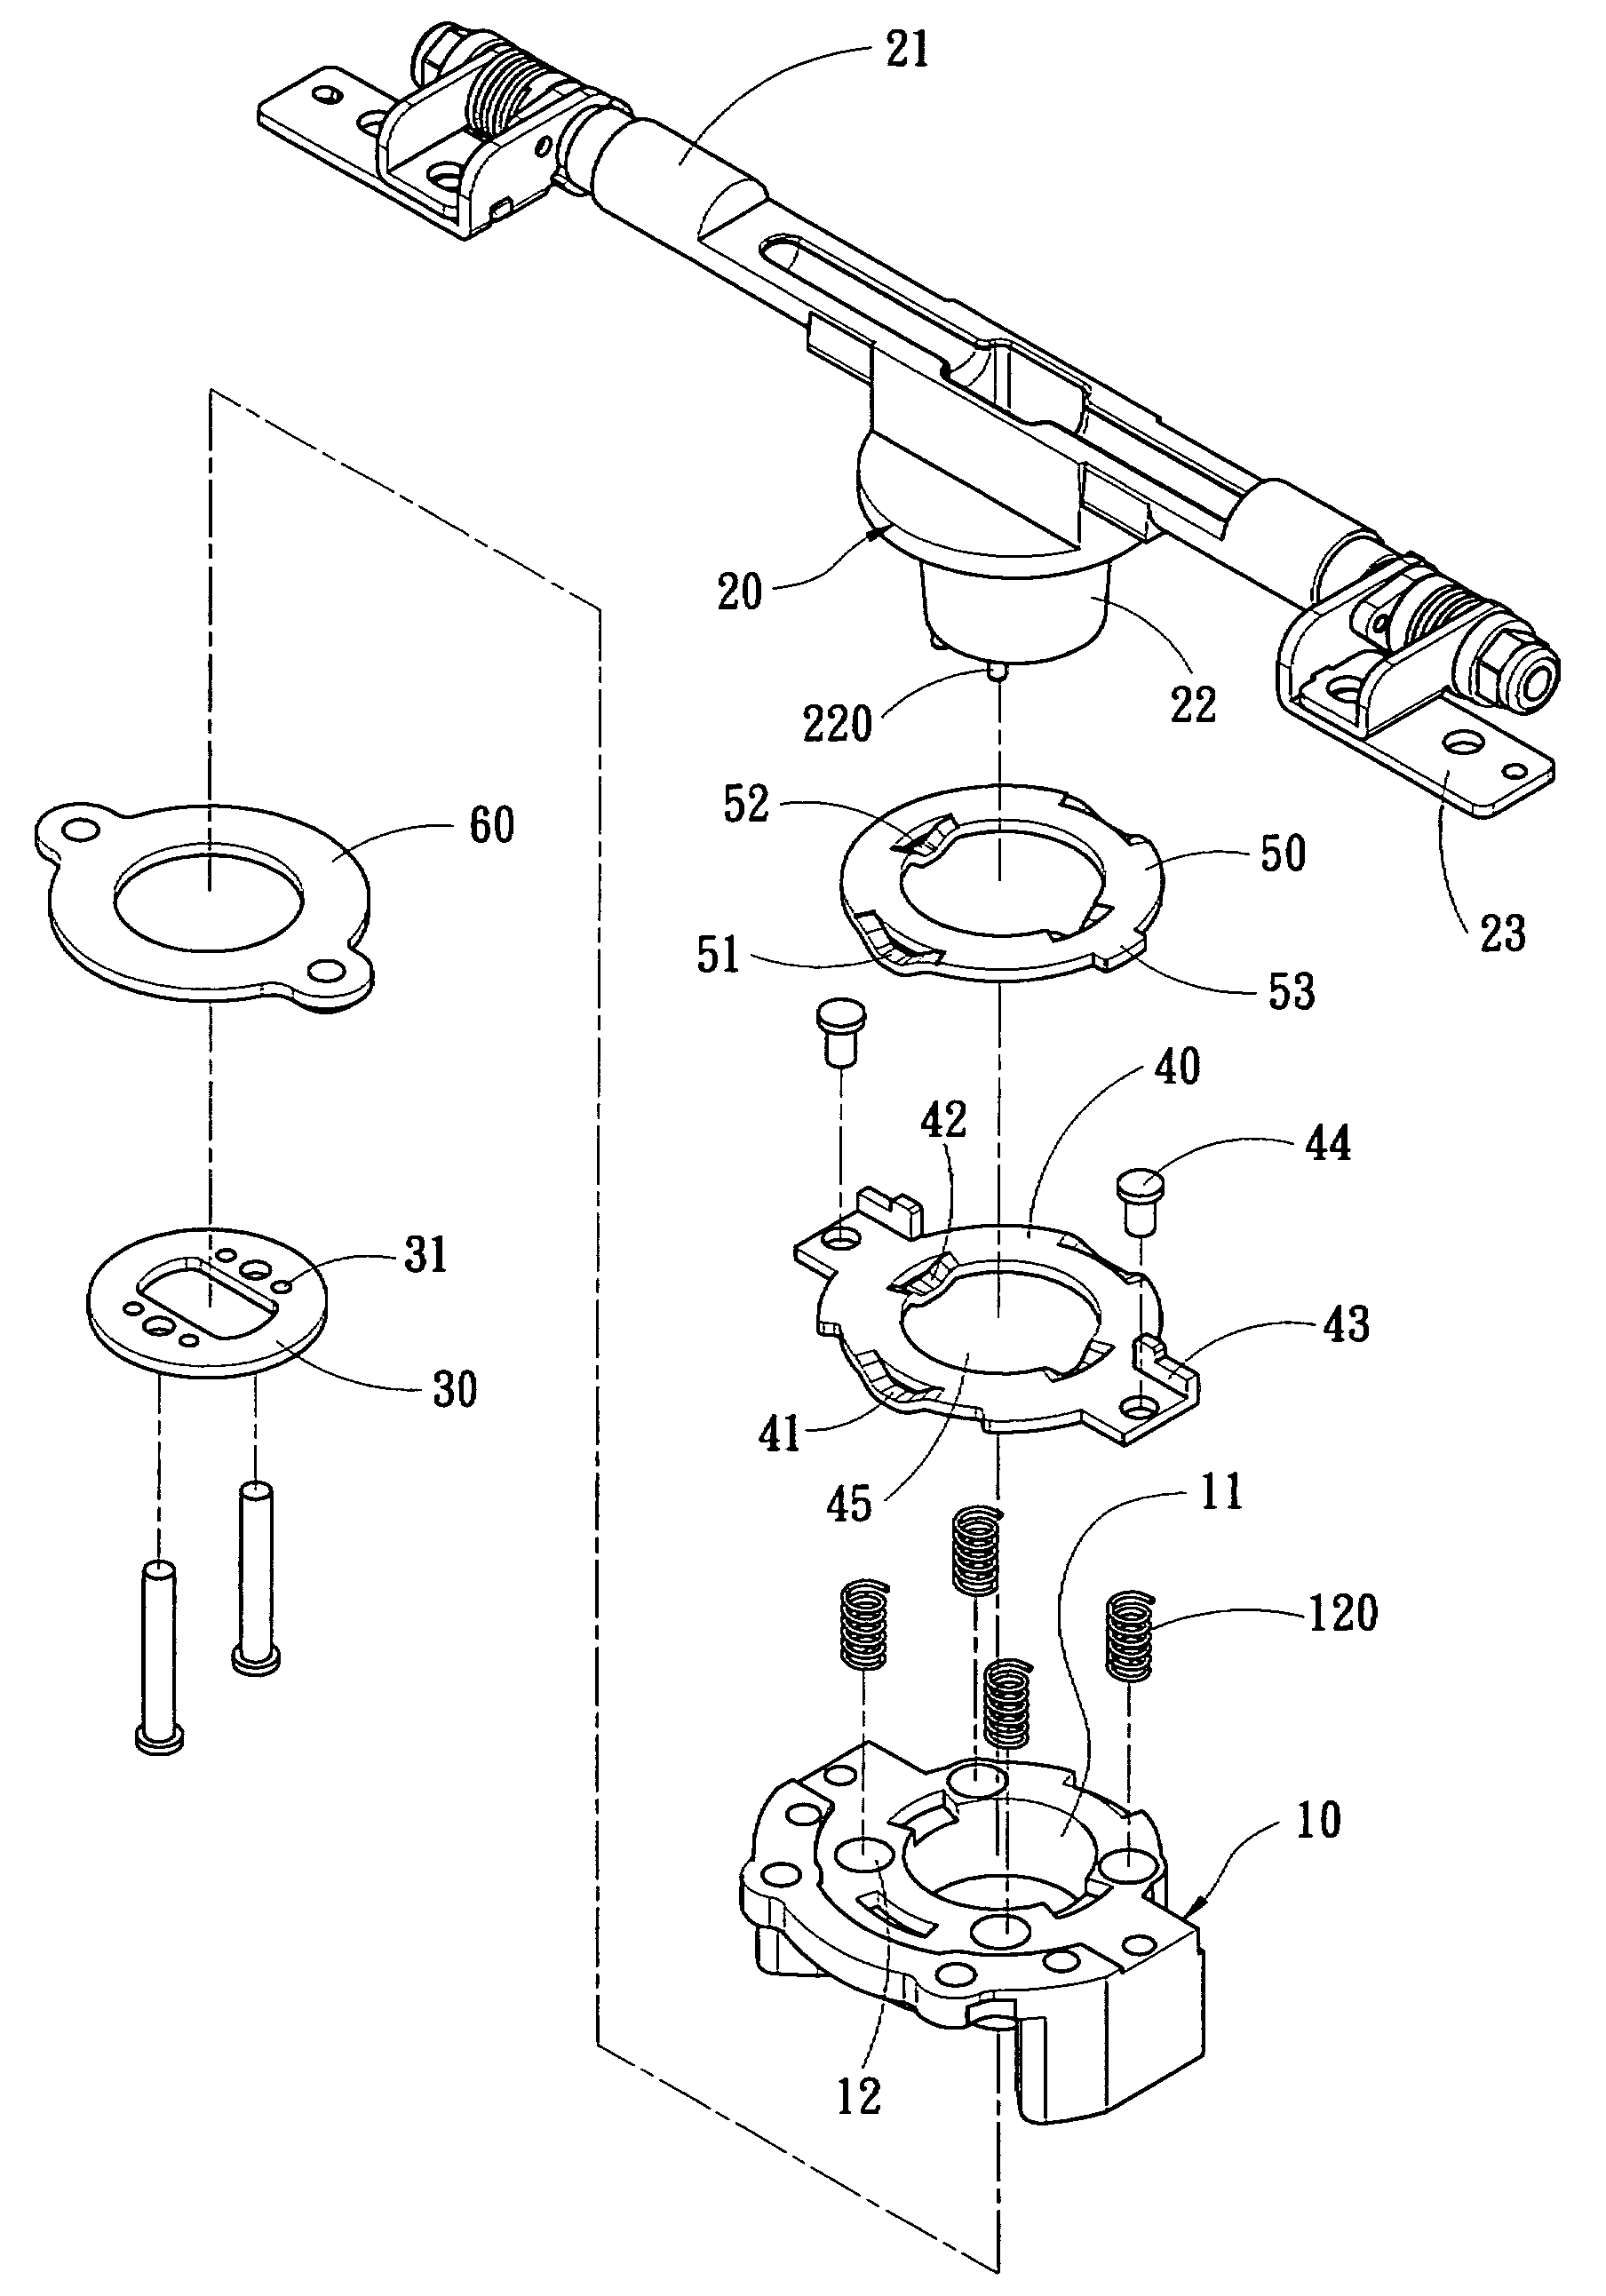 Rotating hinge with an elevating structure